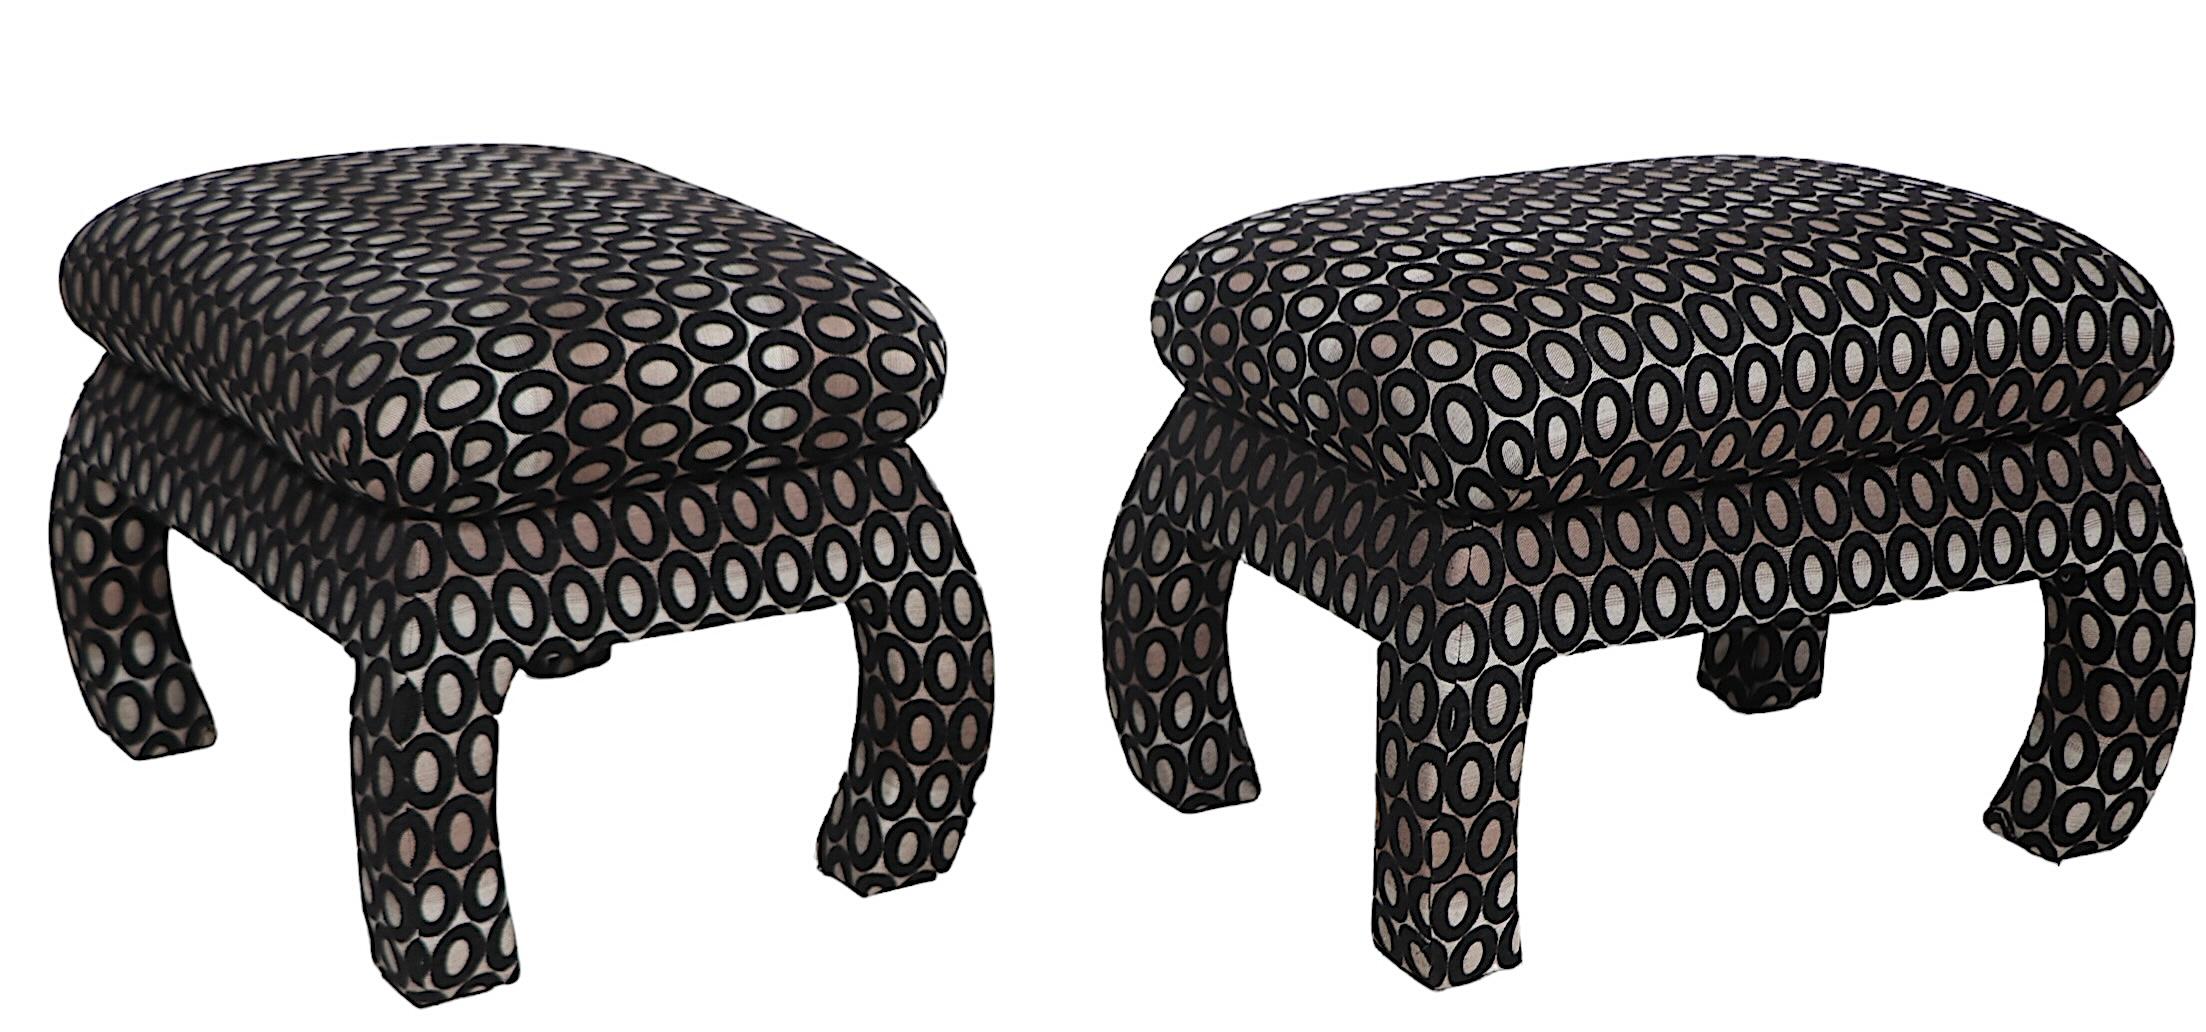 Mod Pr. of  Upholstered Stools Ottomans Benches c 1970/1980's  For Sale 4